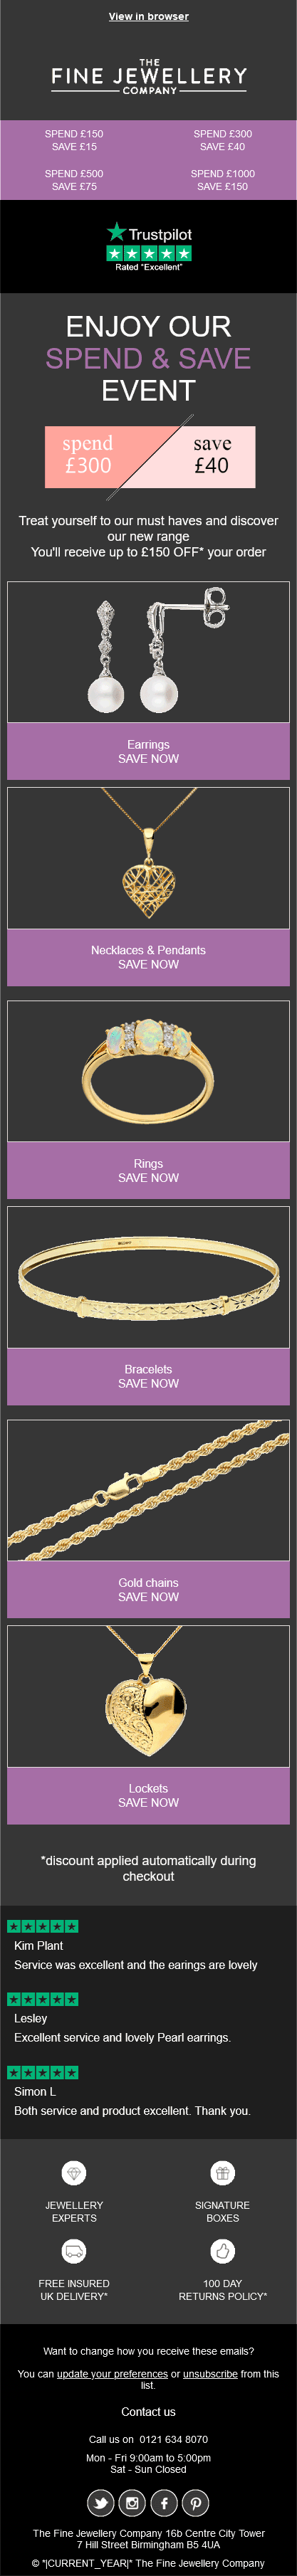 Email Templates Created For The Fine Jewellery Company Marketing Jewellery Dark mode on mobile design